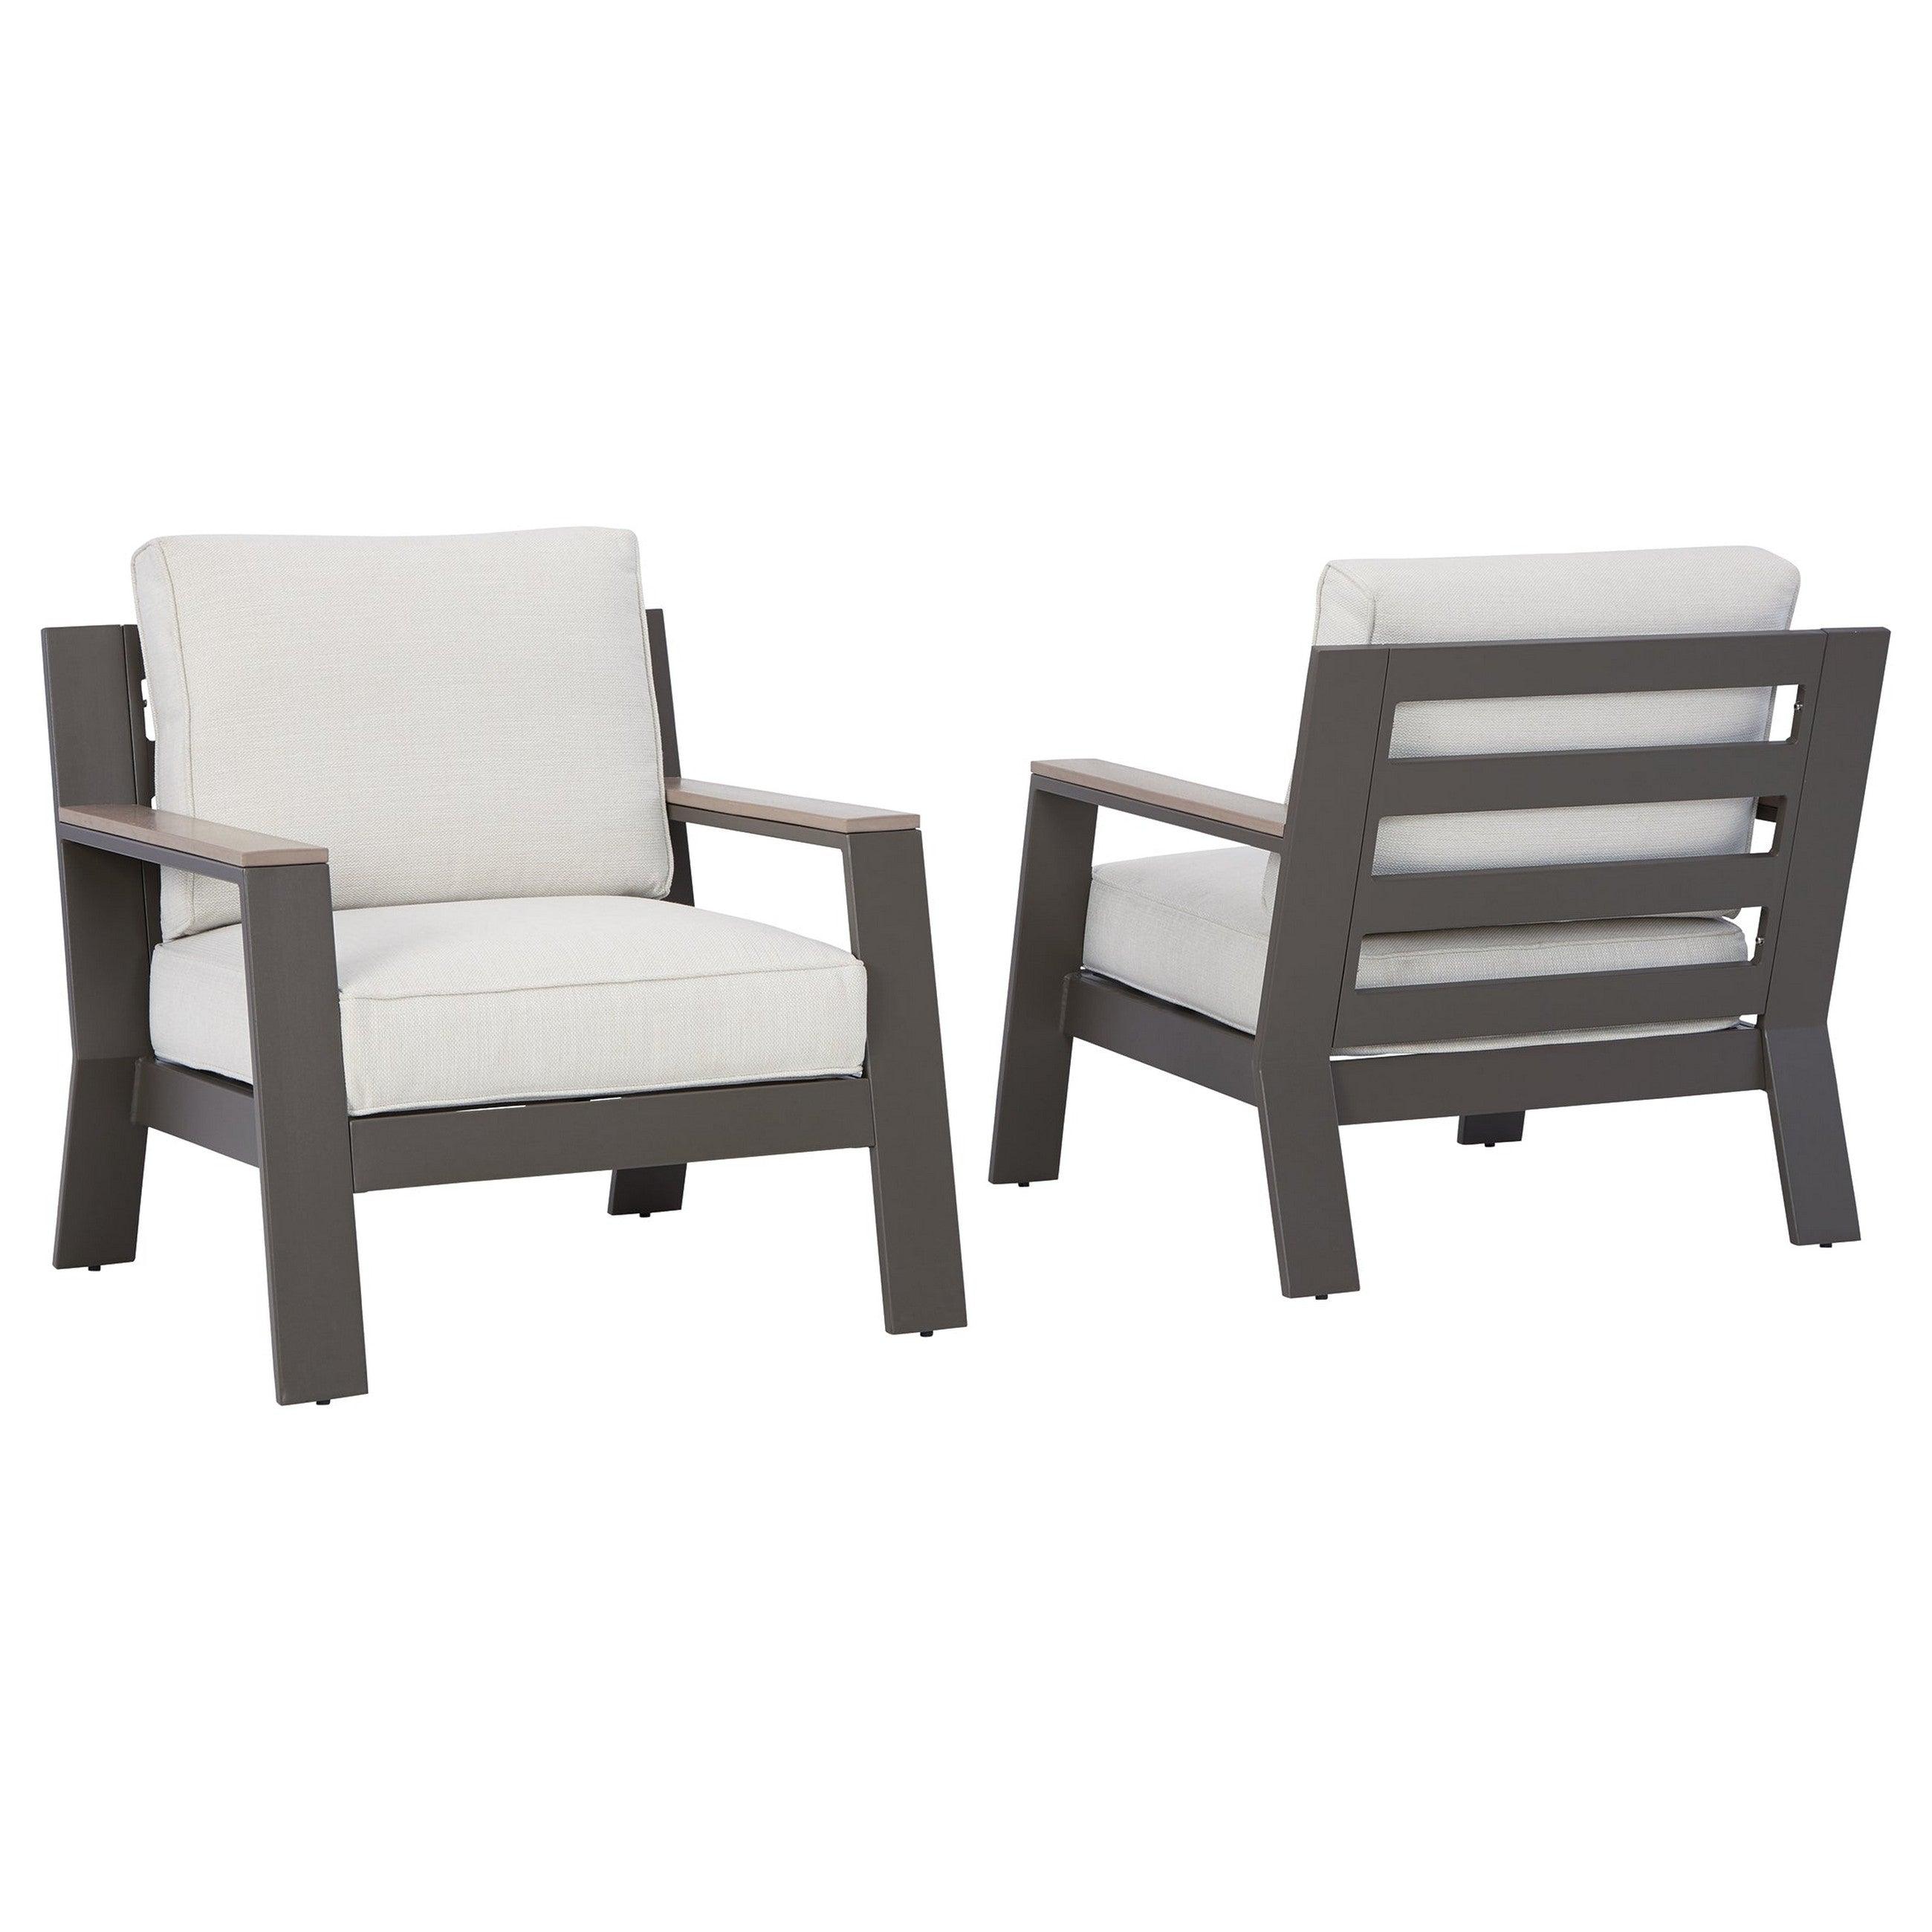 Tropicava Outdoor Lounge Chair with Cushion Ash-P514-820